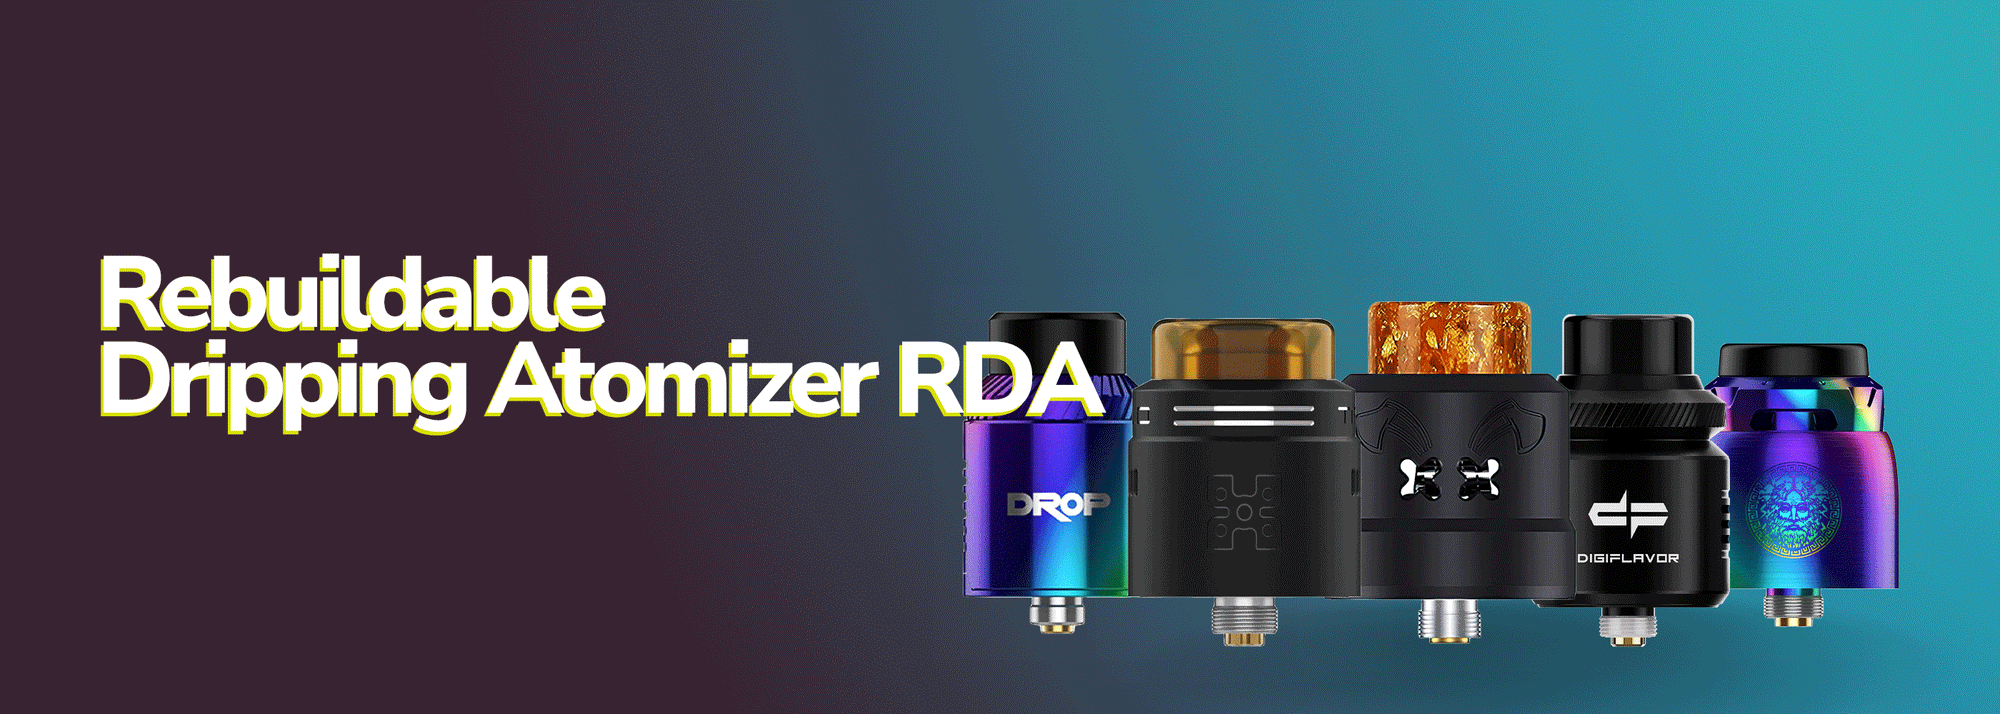 Buy Rebuildable Dripping Atomizer RDA - Wick and Wire Co Melbourne Vape Shops, Victoria Australia